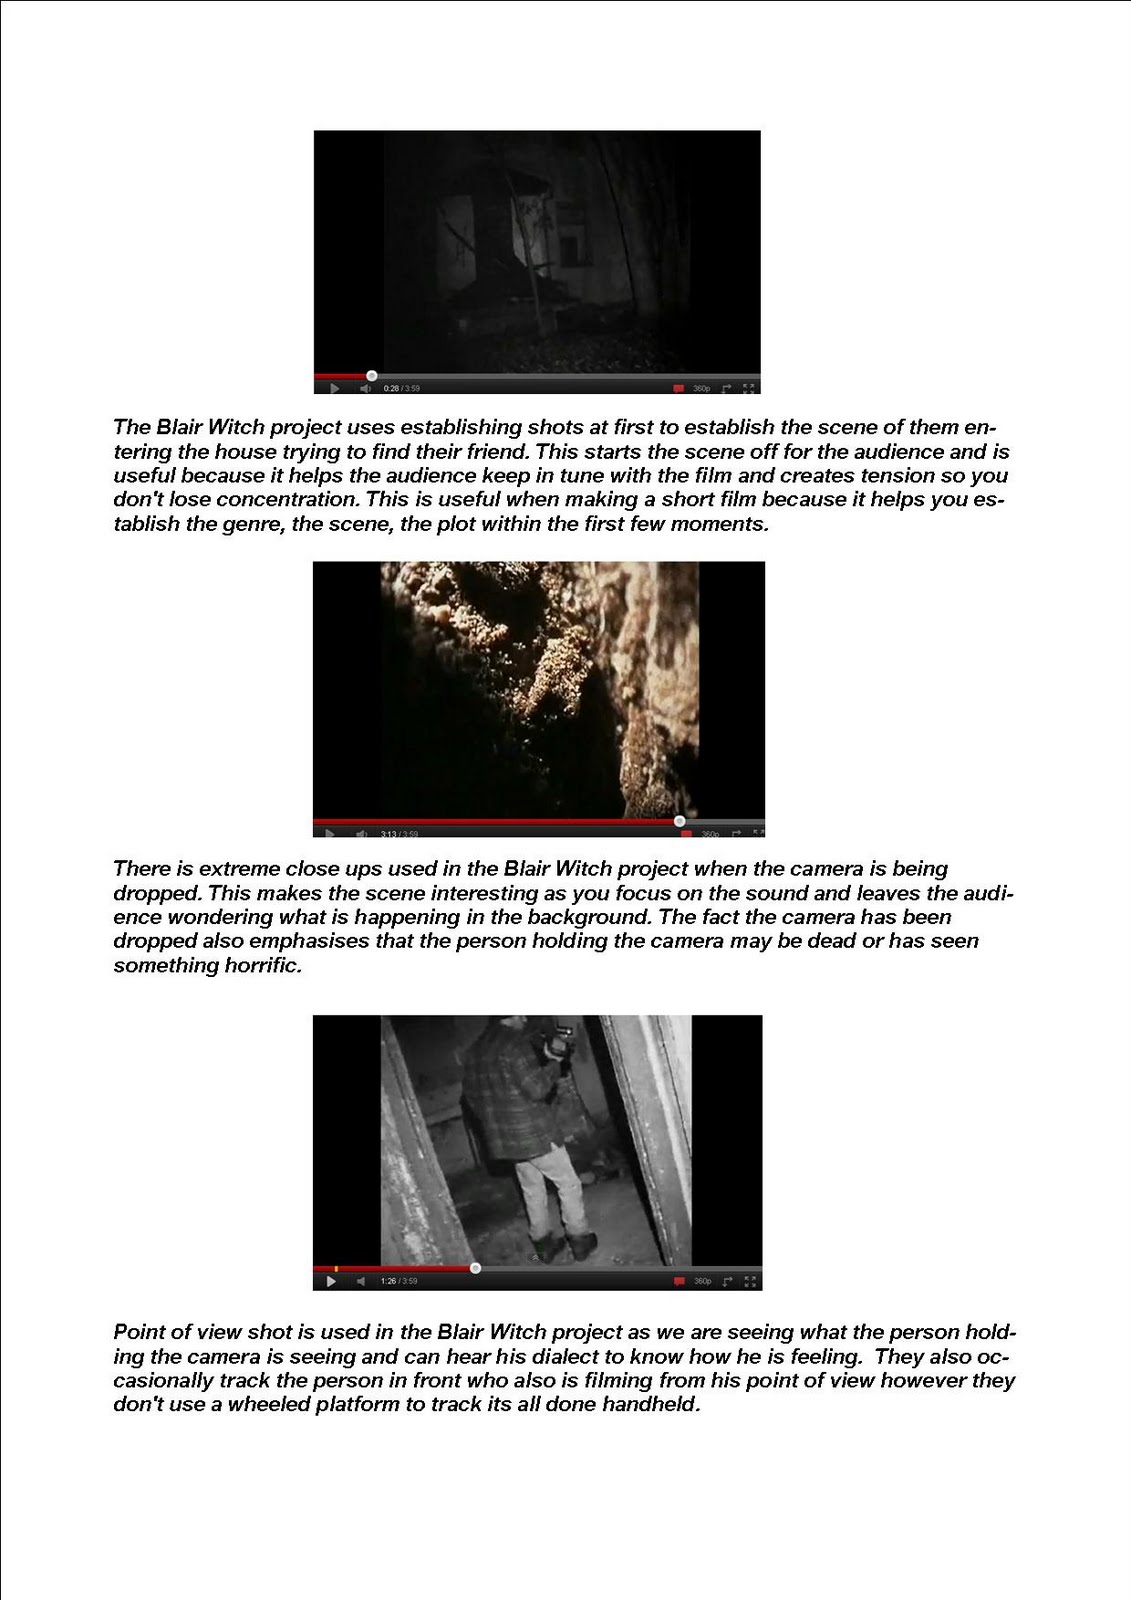 A2 Advanced Portfolio: Product Research- Blair Witch Project